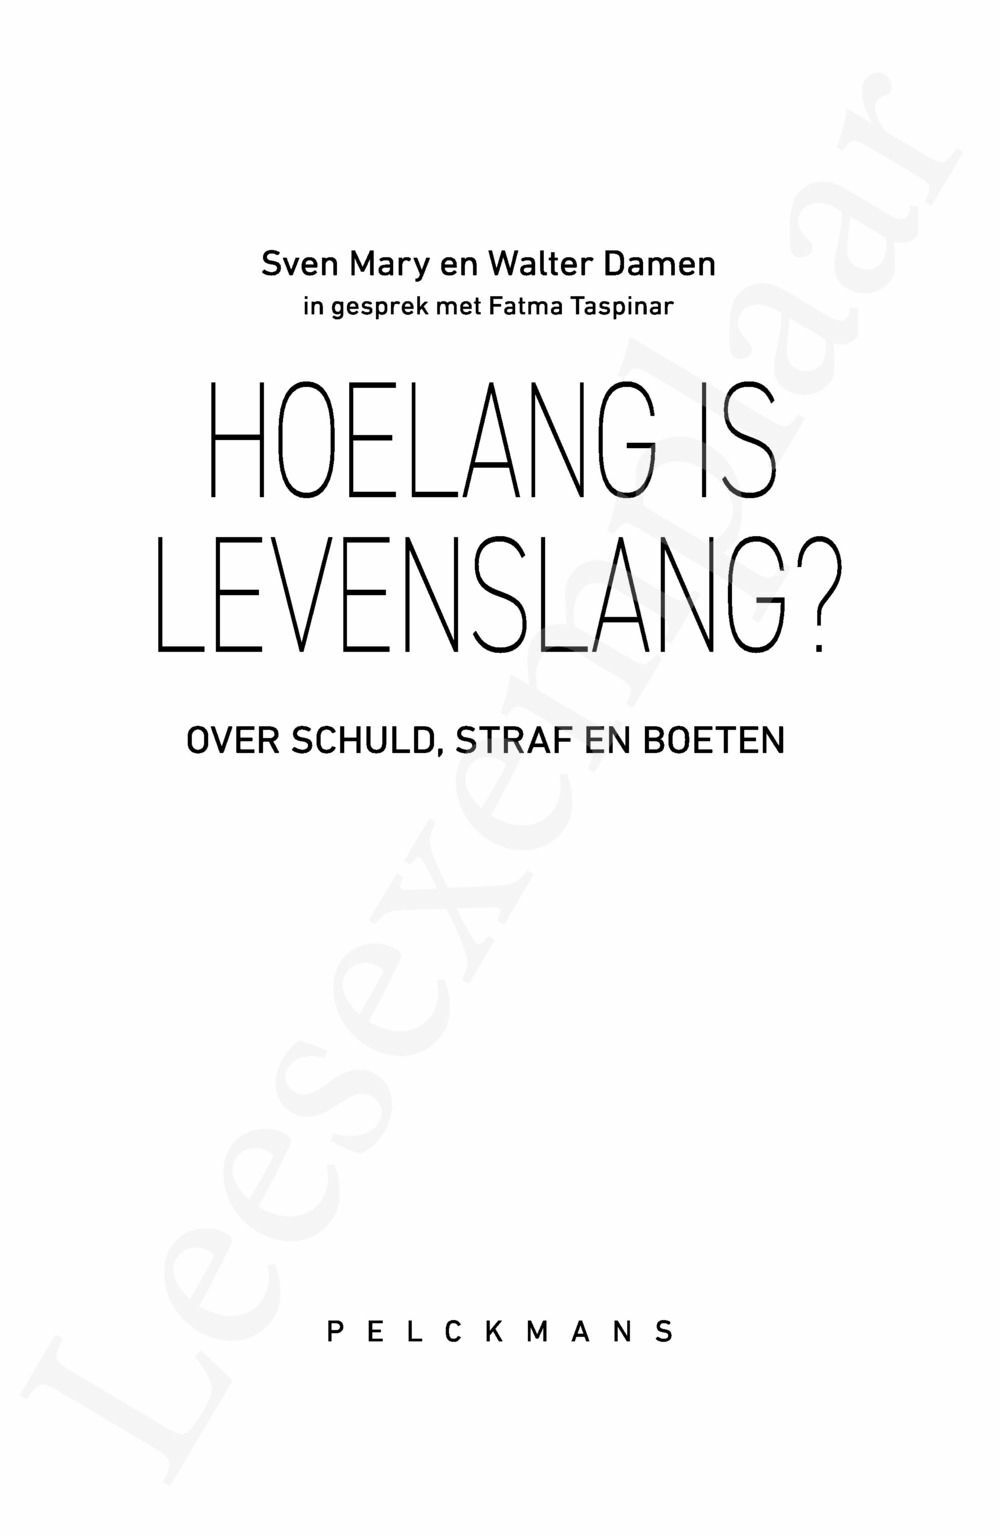 Preview: Hoelang is levenslang?